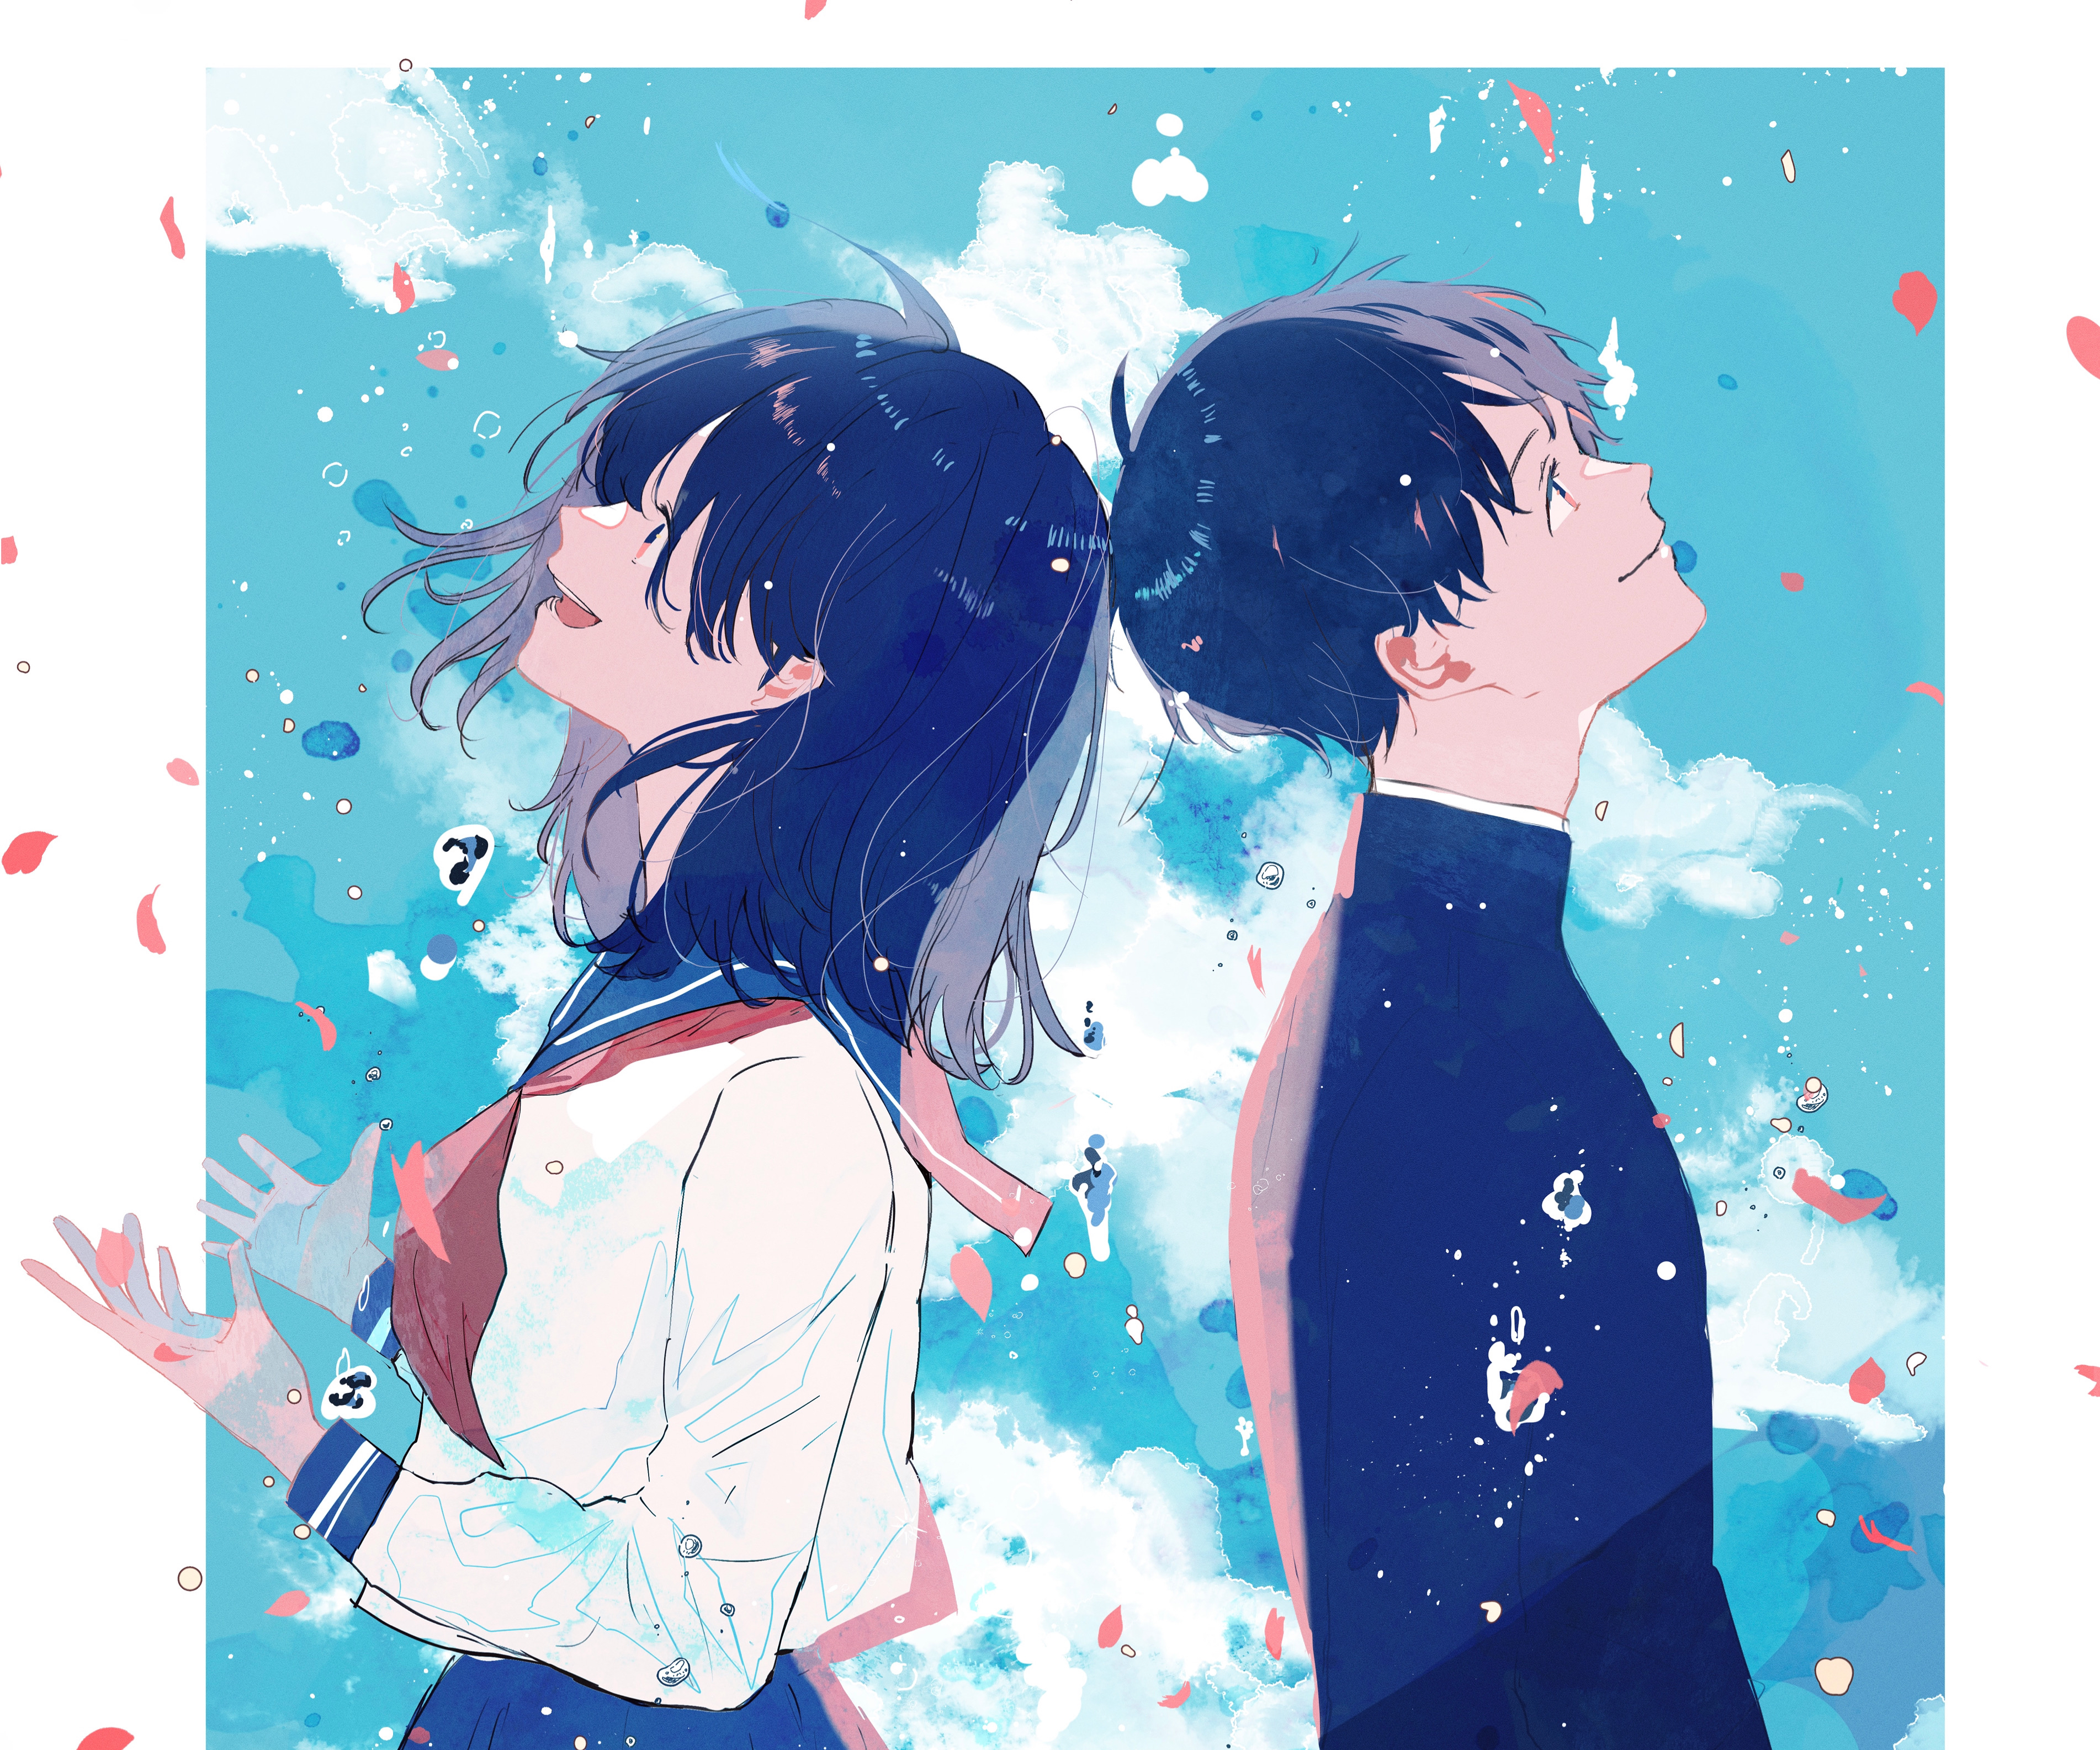 100+] Romantic Anime Couples Wallpapers | Wallpapers.com